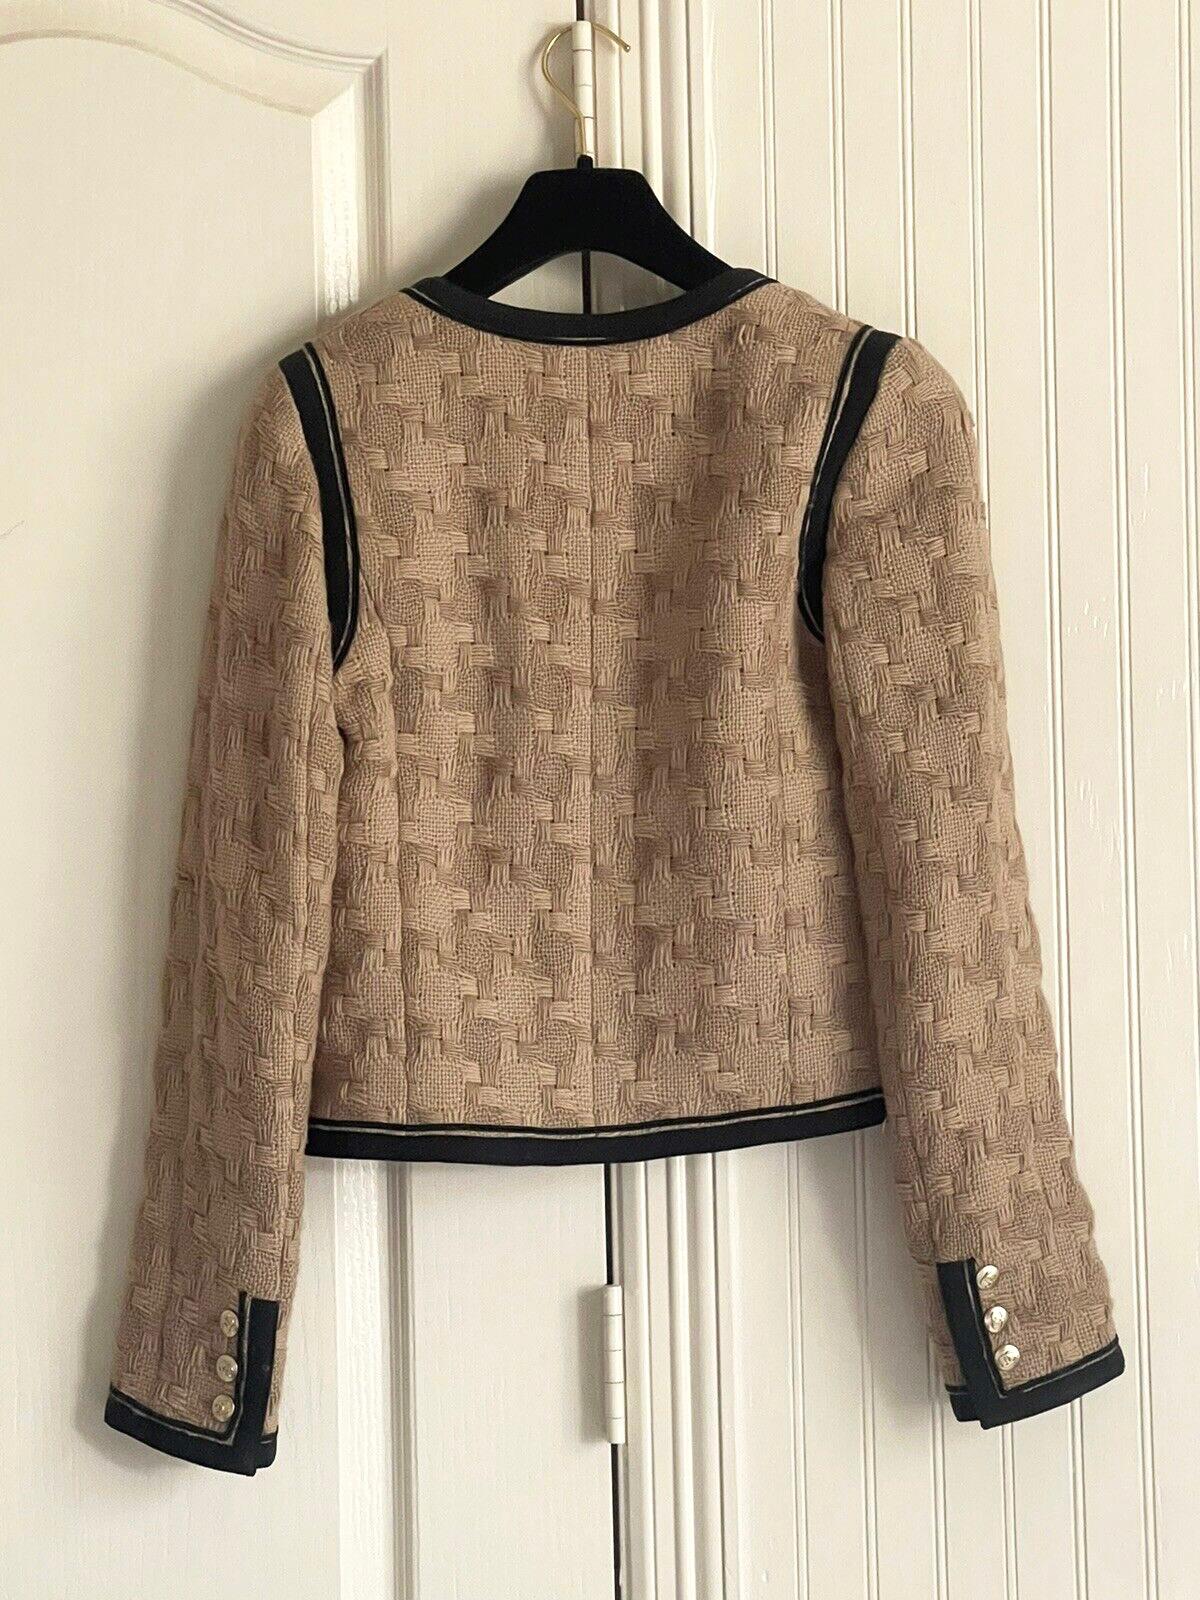 Chanel Timeless CC Buttons Nude Beige Tweed Jacket 2